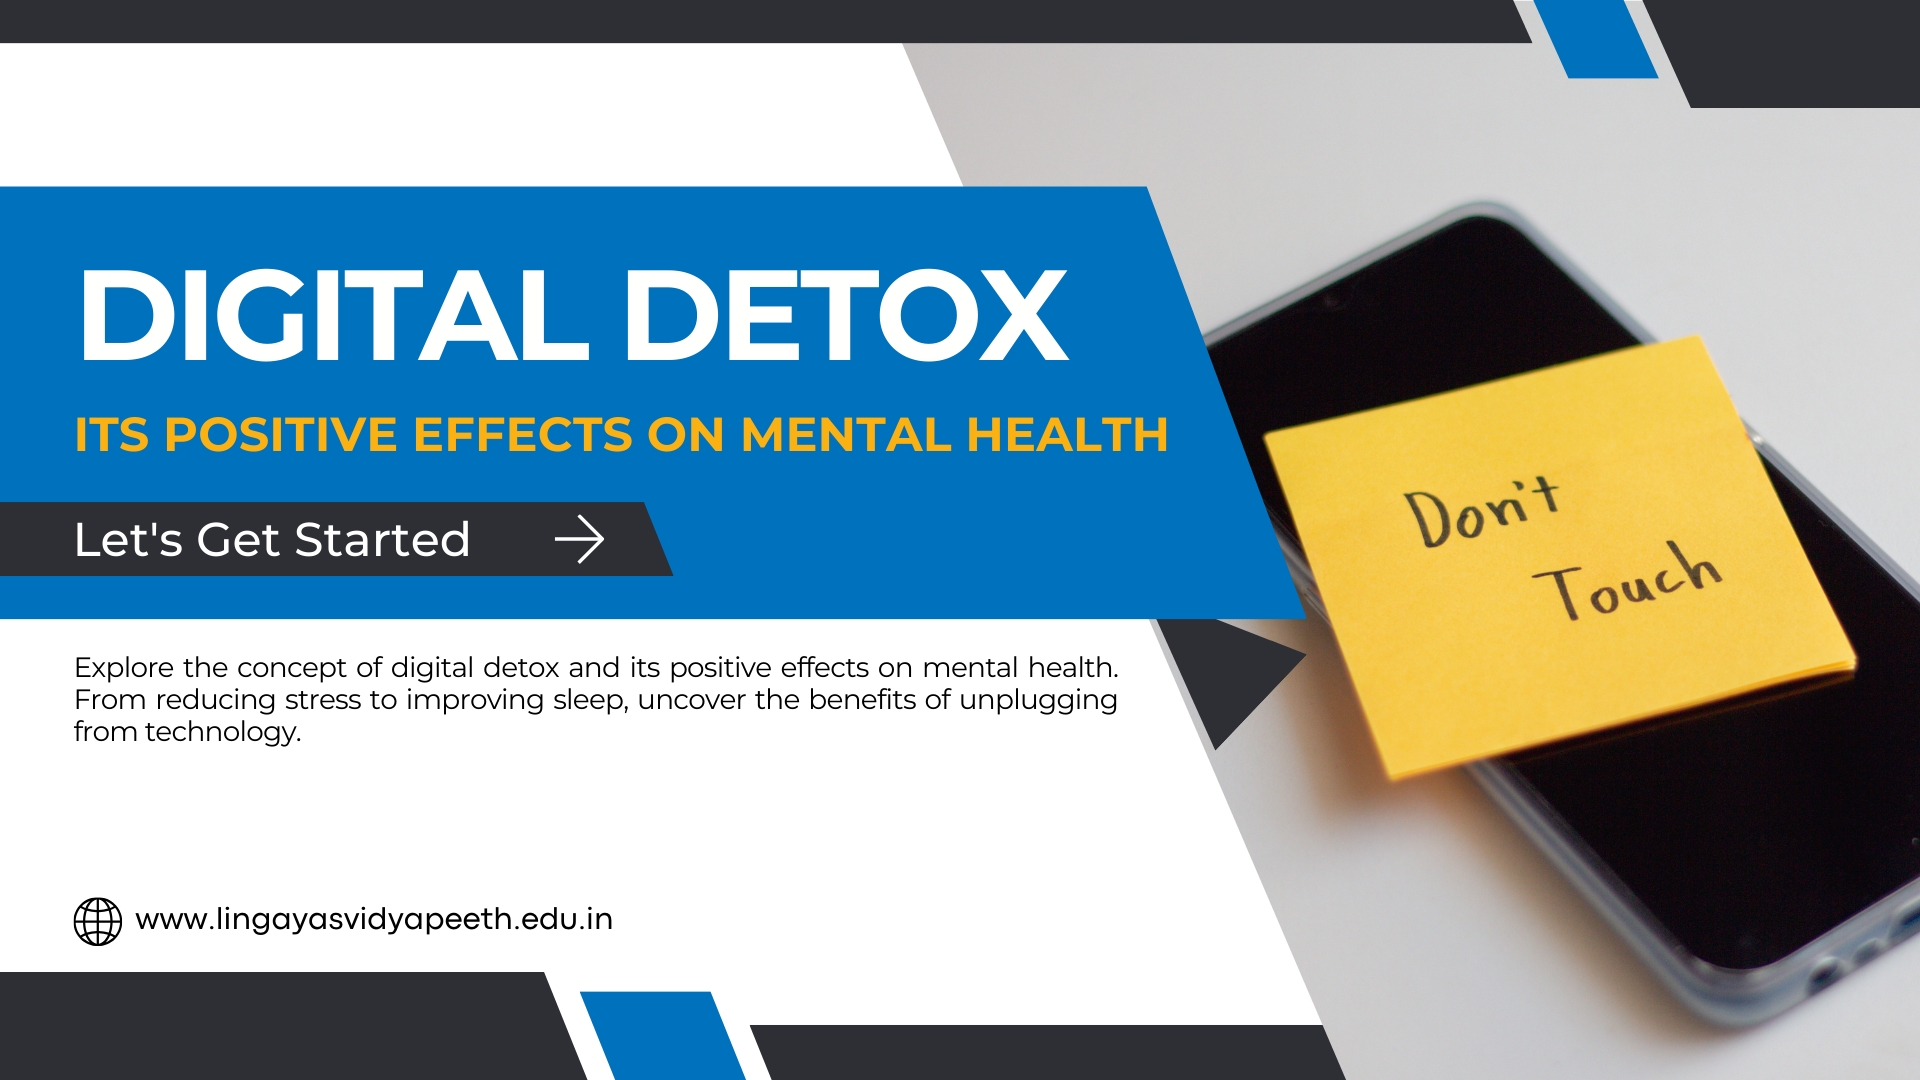 What is Digital Detox and its Positive Effects on Mental Health?